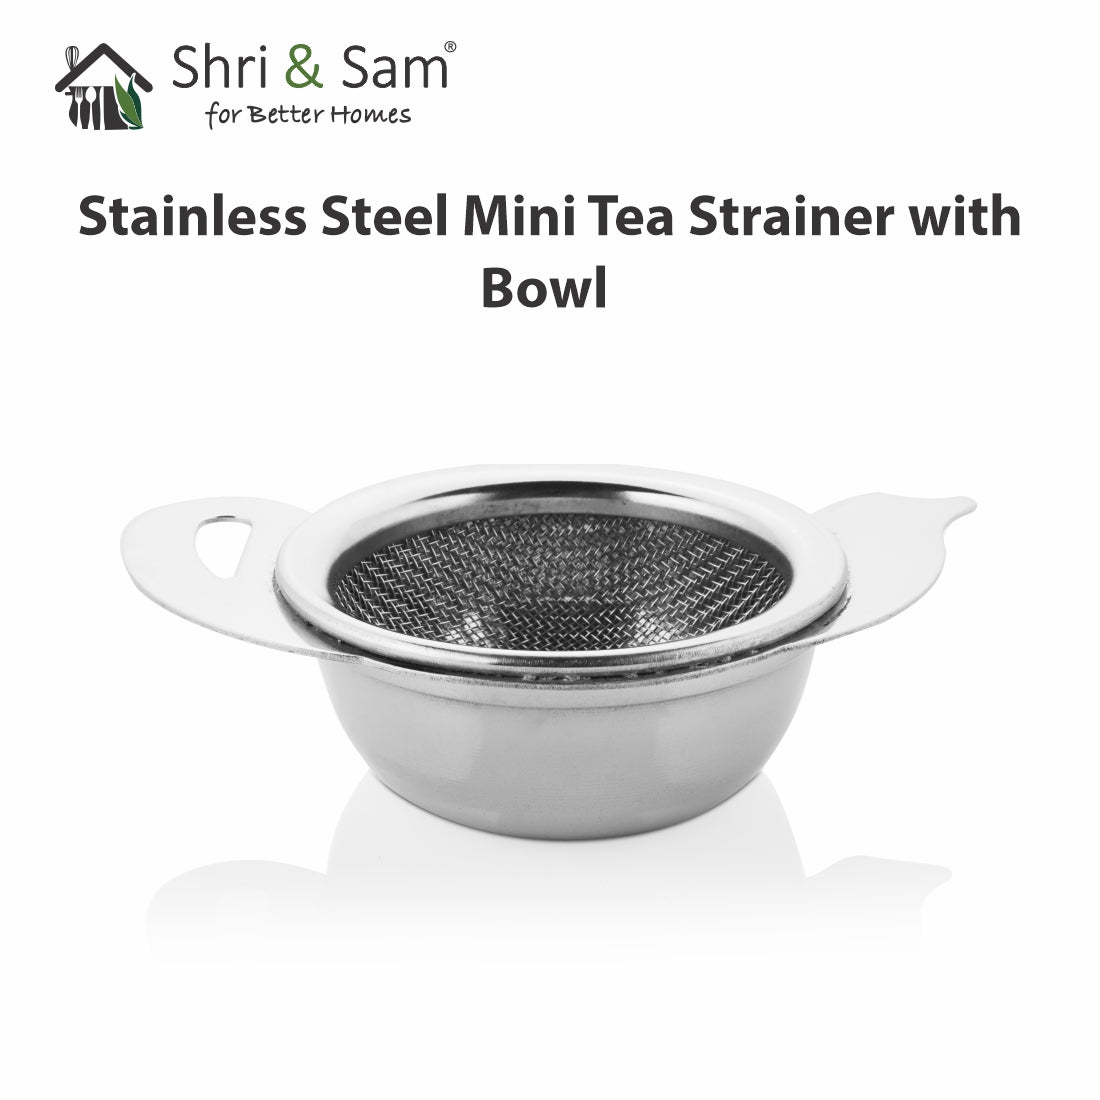 Stainless Steel Mini Tea Strainer with Bowl